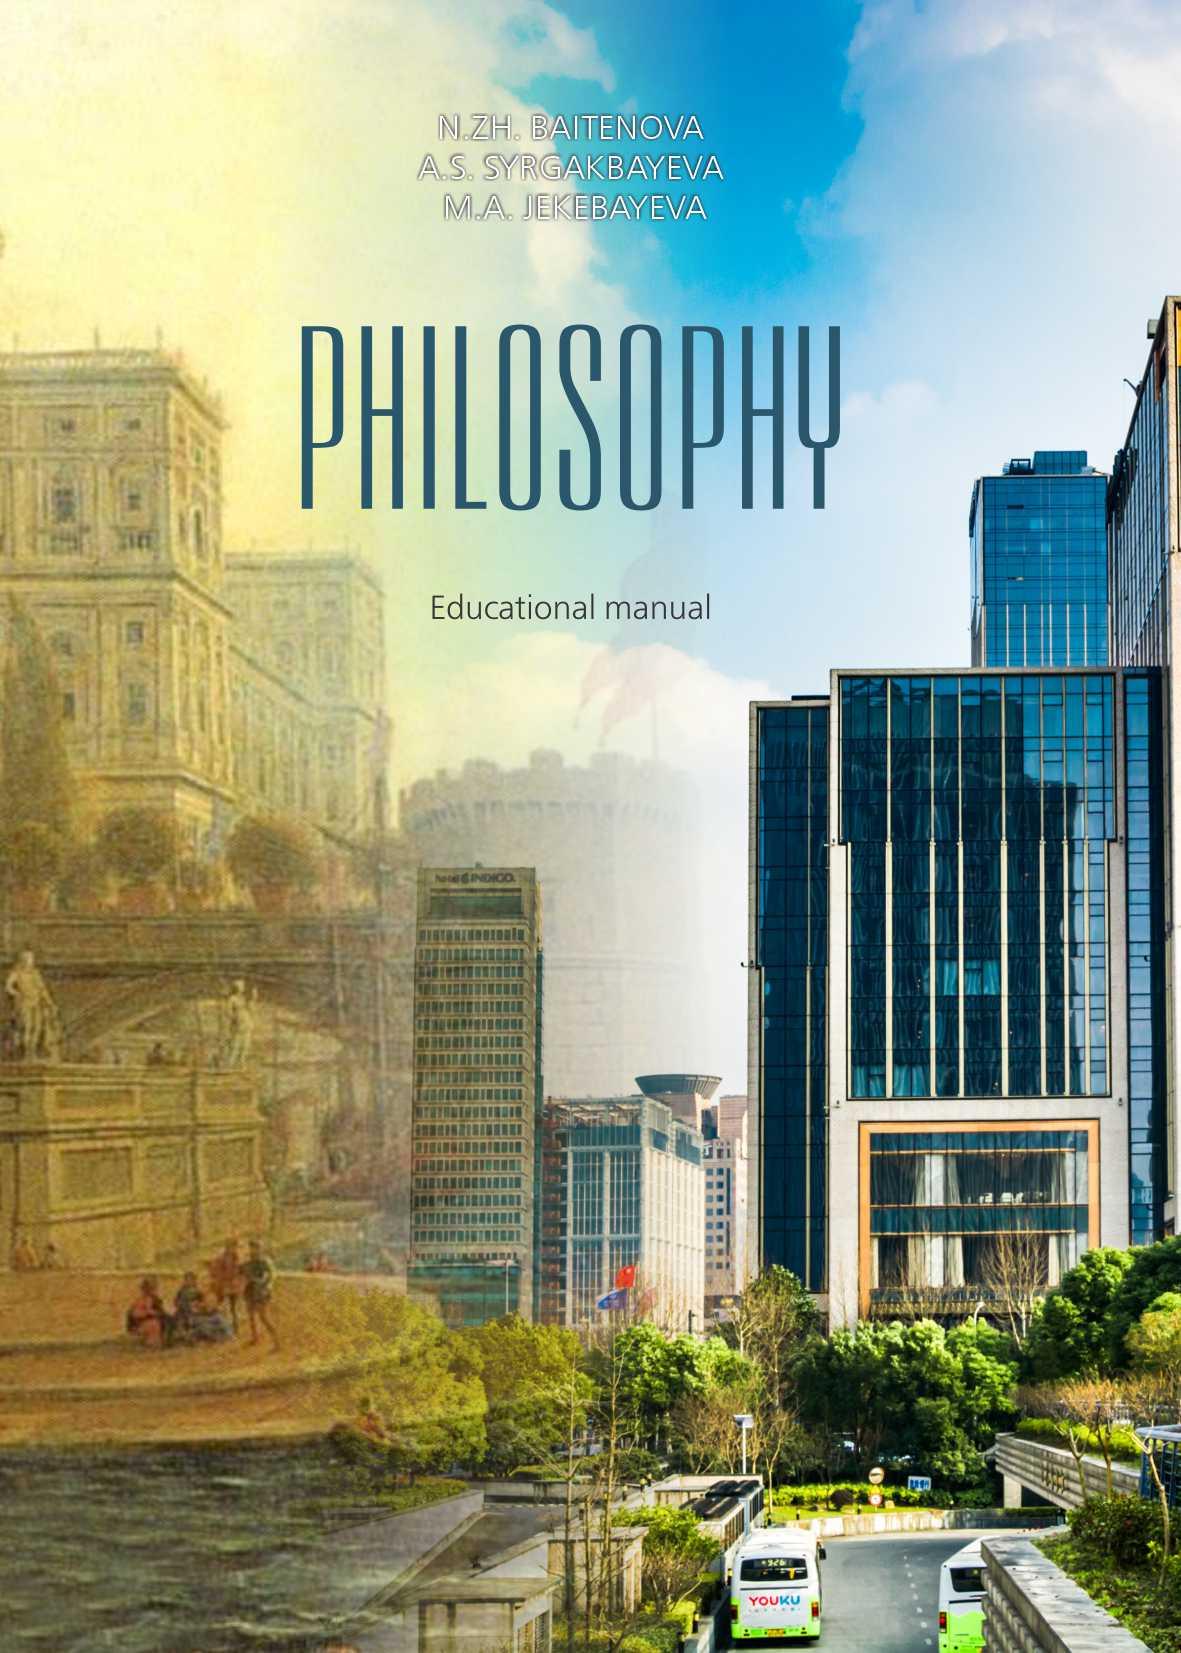 Philosophy: Еducational manual– 260 p.